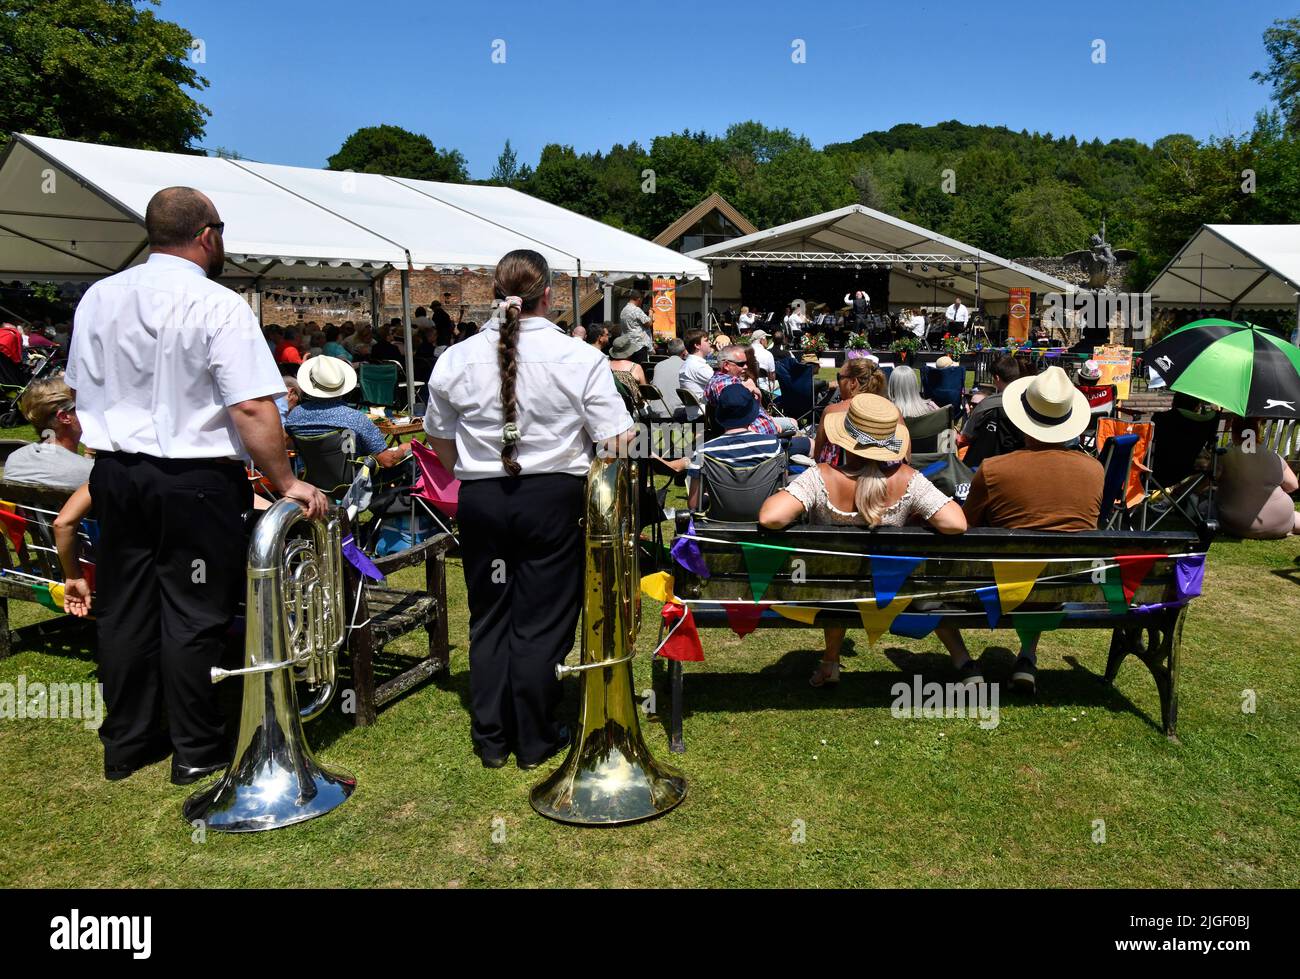 Ironbridge Gorge, Shropshire, Uk.July 10th 2022. Ironbridge Gorge Brass Band Festival 2022. Spectators and musicians enjoying glorious summer weather and a free mucic festival in the grounds of the museum of iron. Credit: Dave Bagnall /Alamy Live News Stock Photo